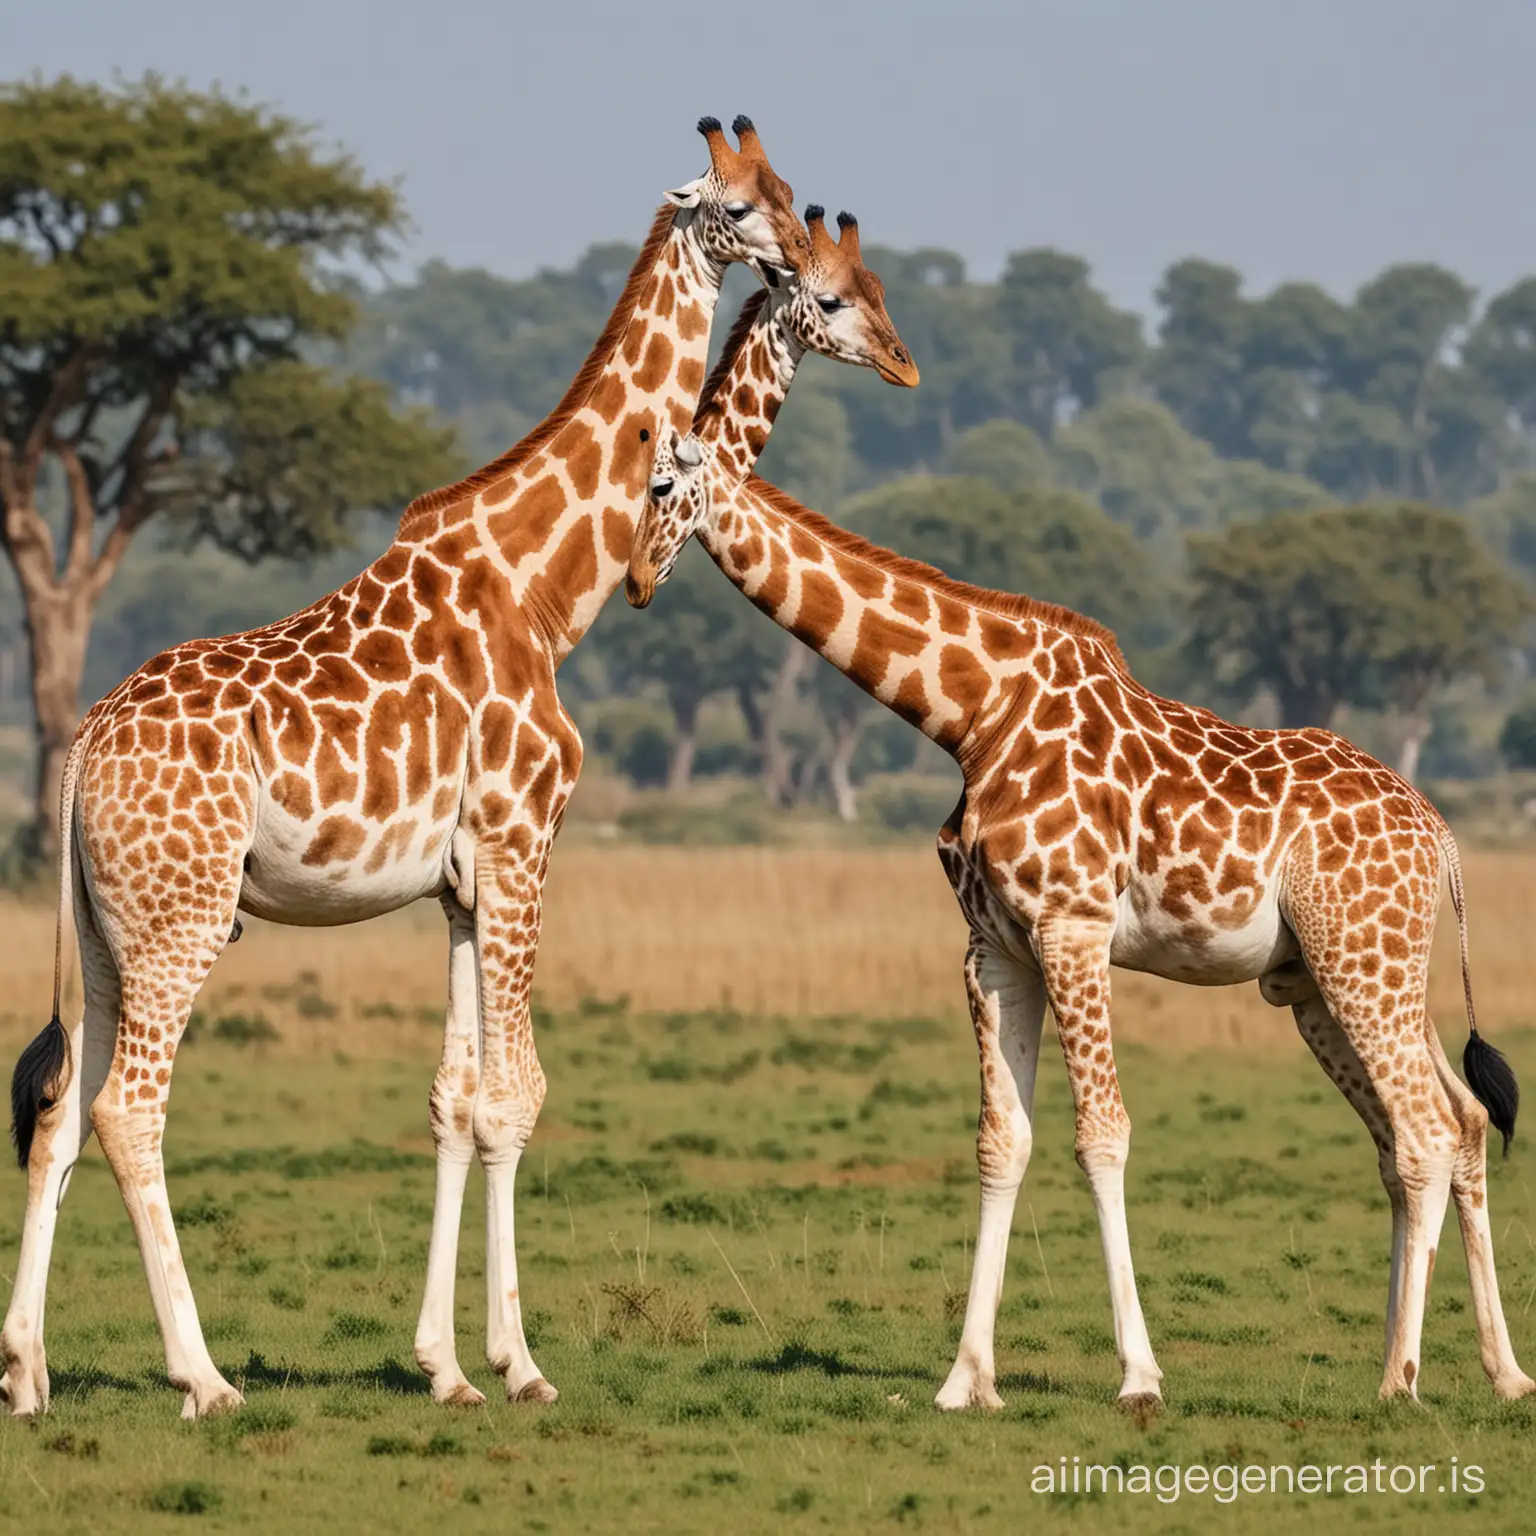 Can you breed two giraffes?